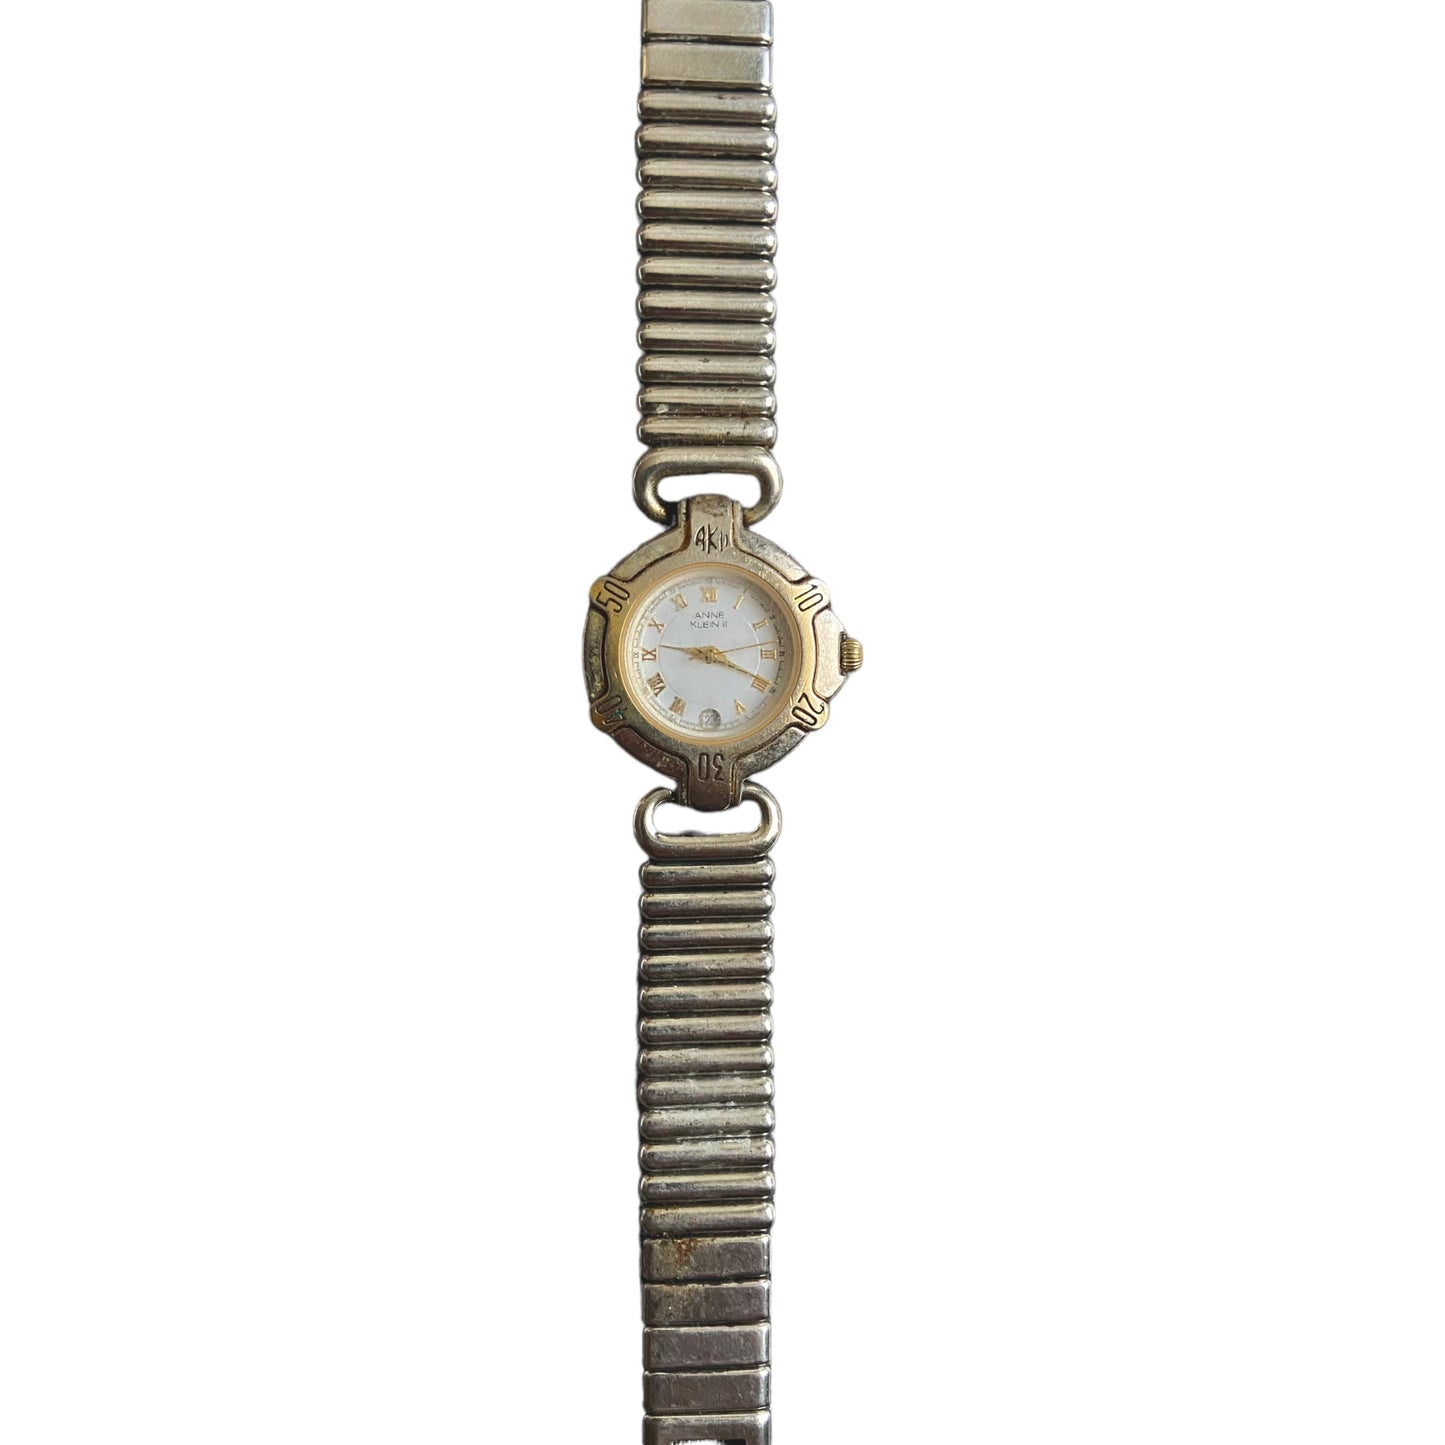 One-of-one | Anne Klein II Thailand movt. Water resistant watch